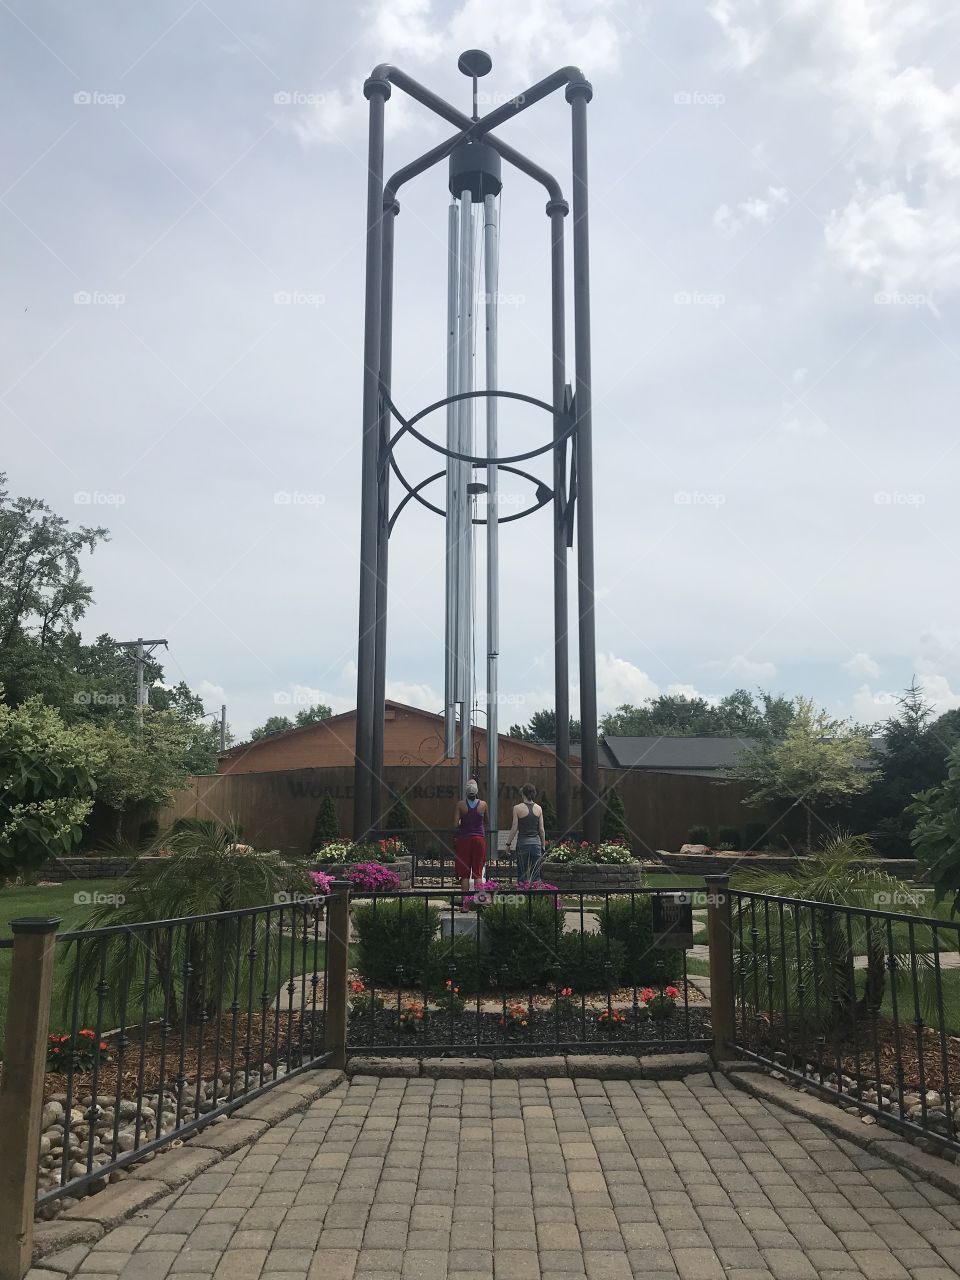 Worlds largest wind chime